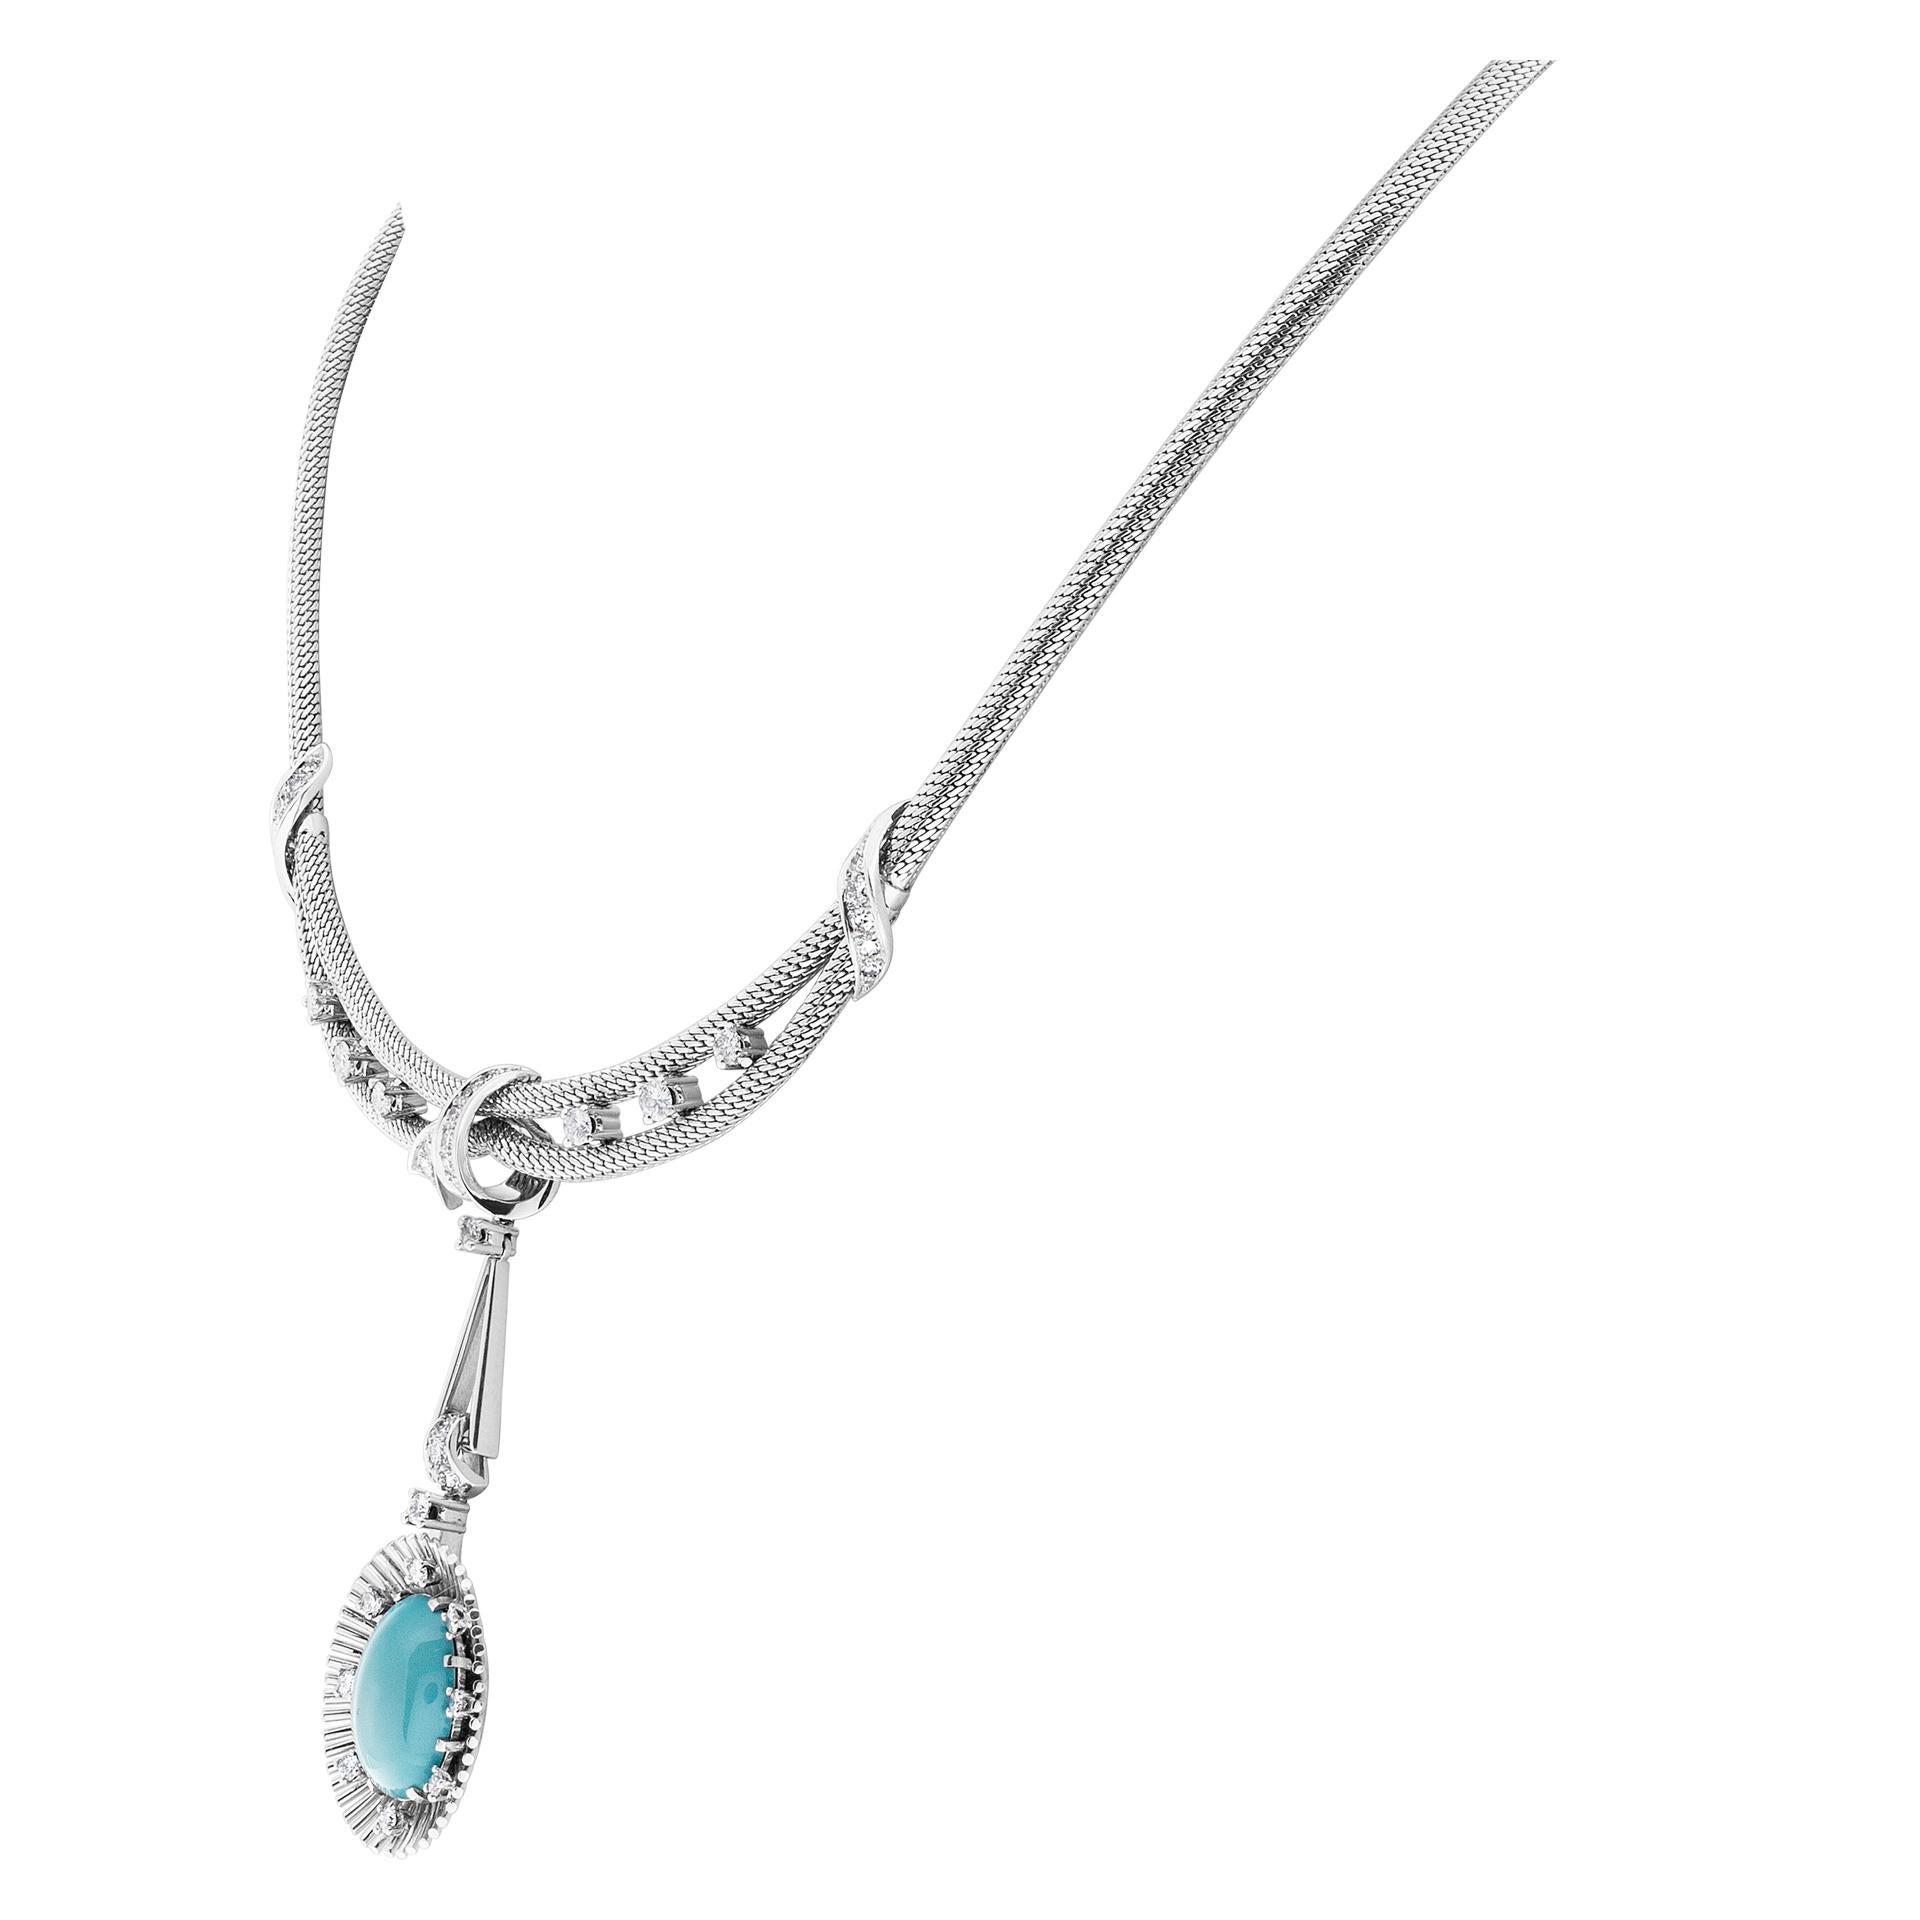 Round Cut Turquoise and Diamond Necklace and Earrings Set in 18 Karat White Gold